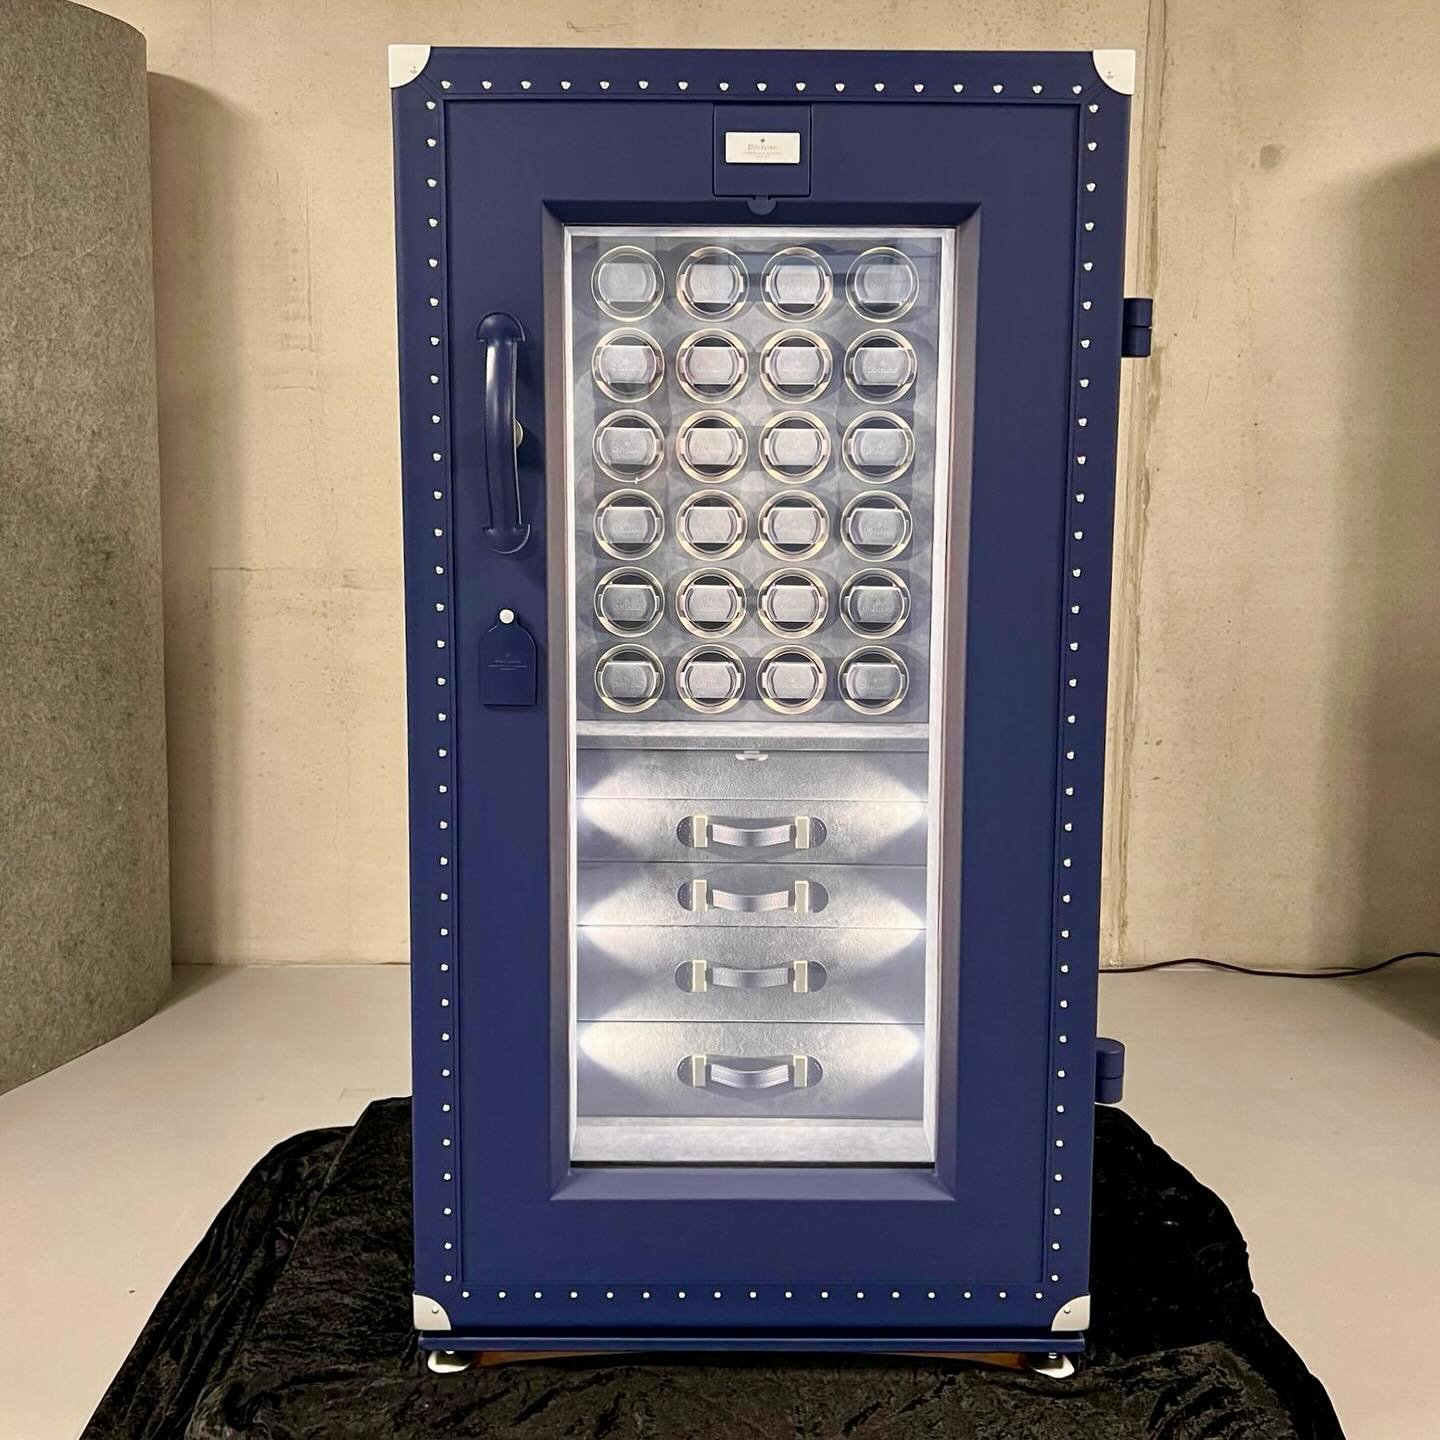 Another „The Gallery“ safe in Deepsea Blue about to leave the manufactory. A statement. A monument. The most beautiful...